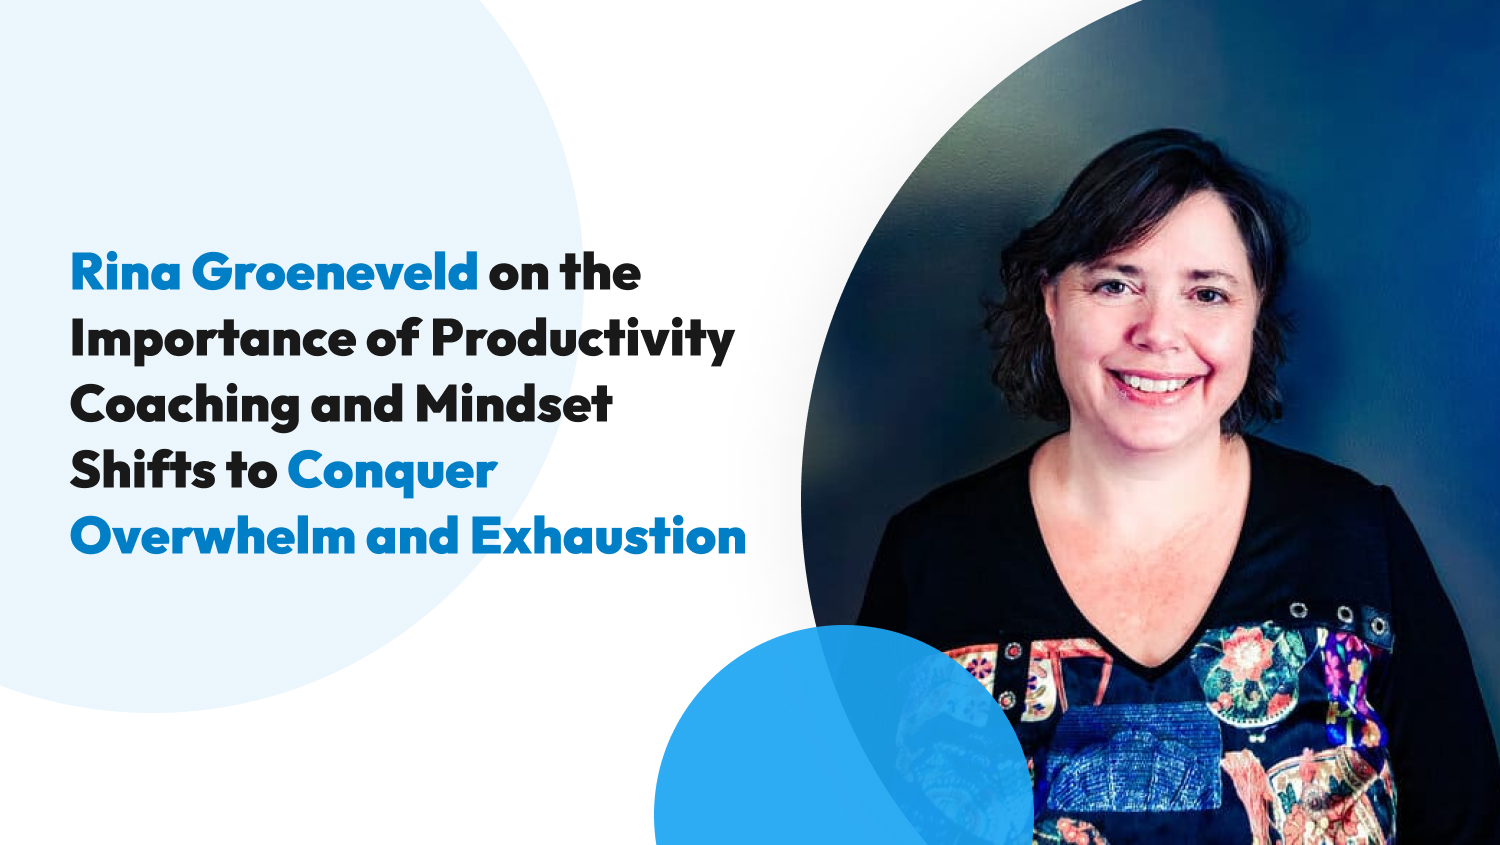 Rina Groeneveld on the Importance of Productivity Coaching and Mindset Shifts to Conquer Overwhelm and Exhaustion